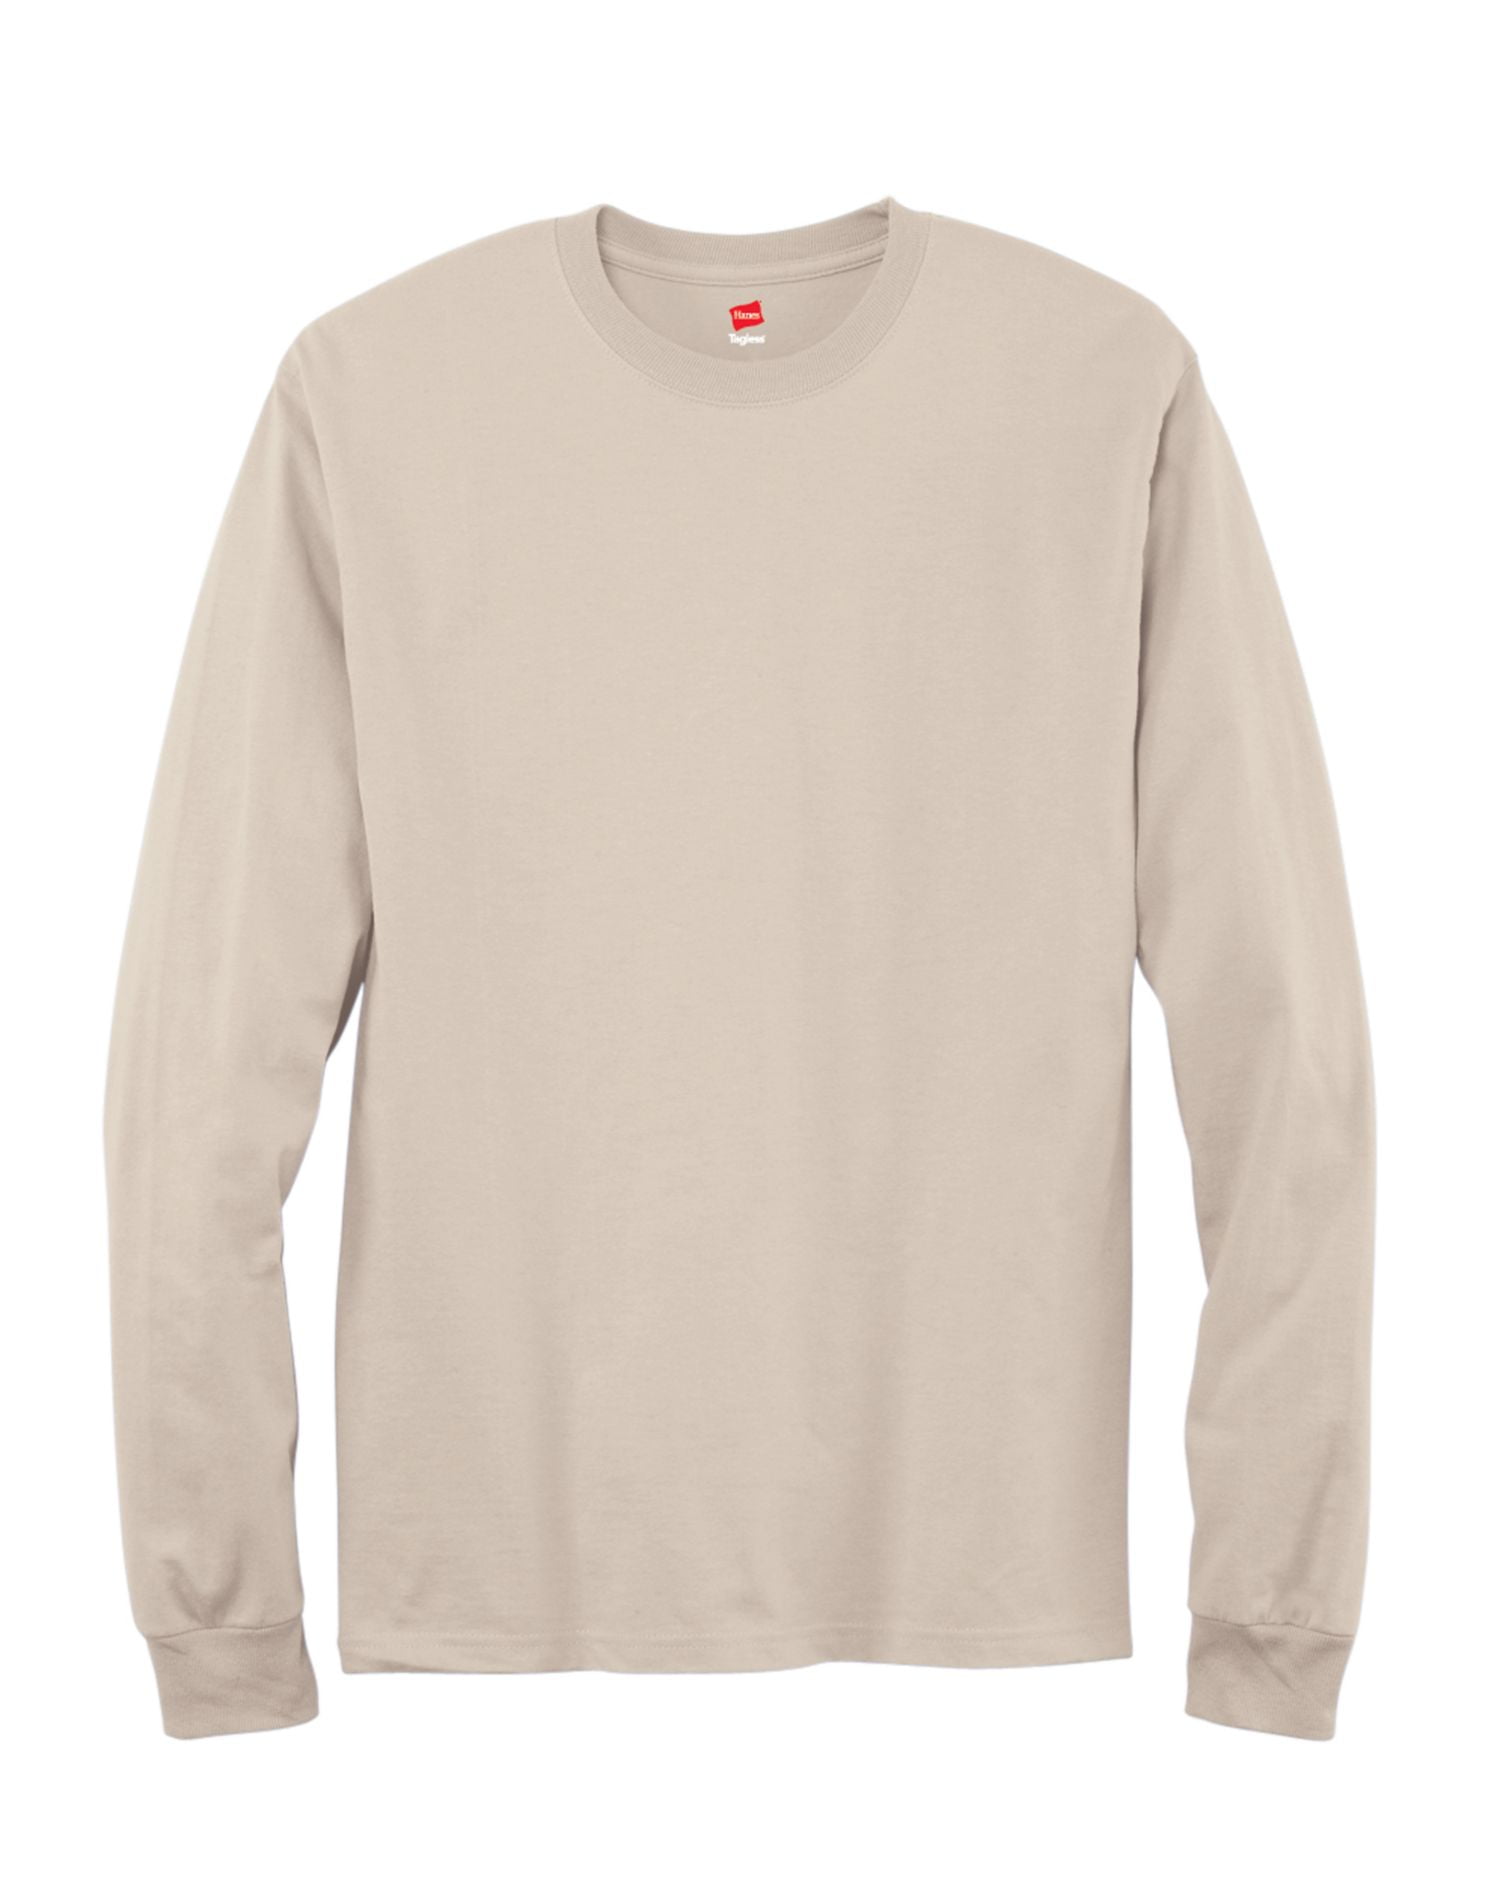 Hanes Men's and Big Men's Authentic Long Sleeve Tee, up to Size